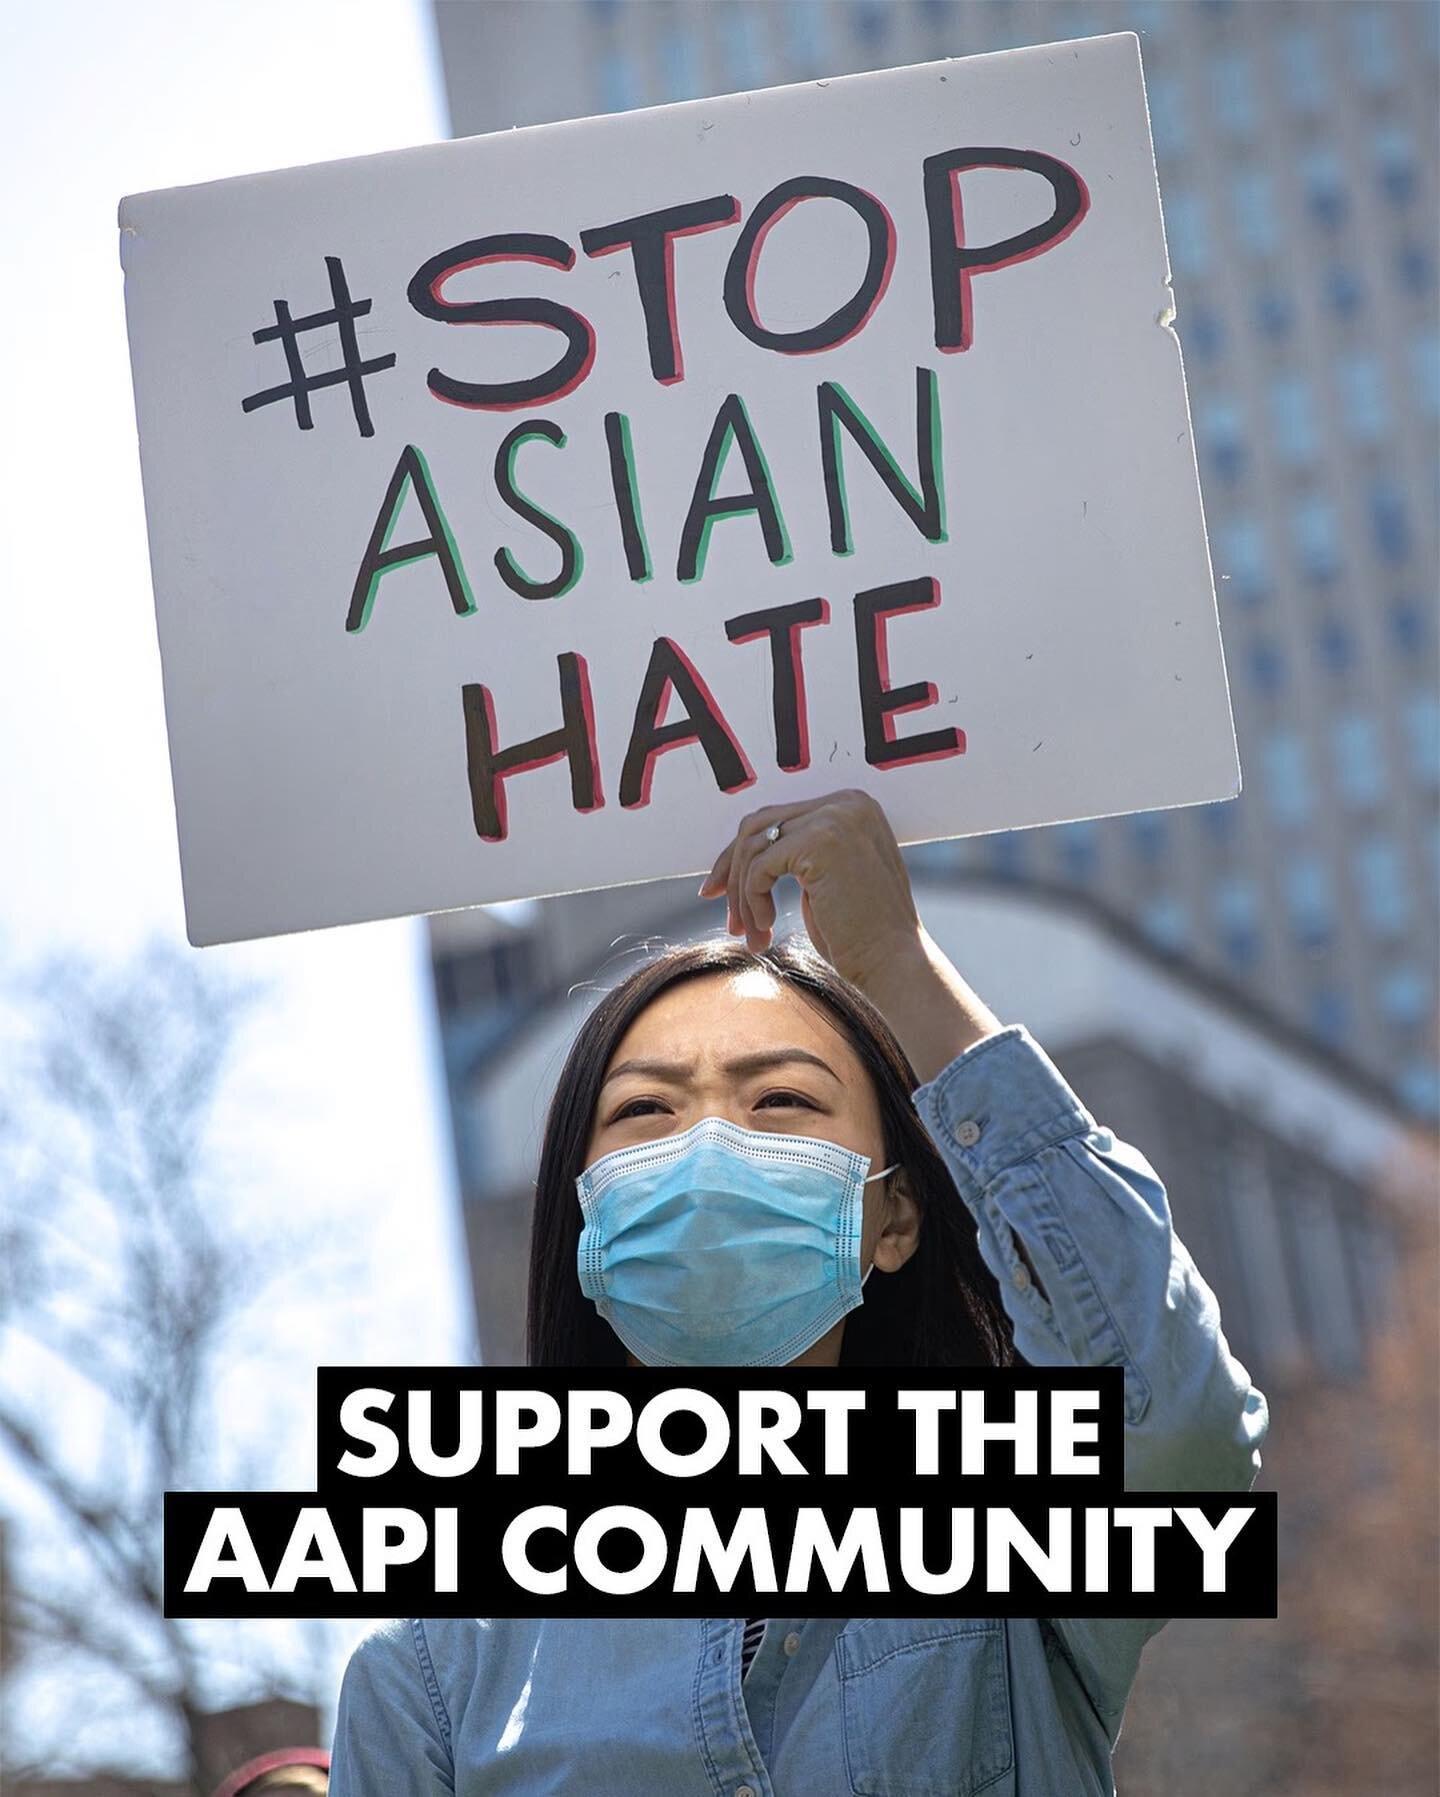 Between 2020 and 2022, 11,400 hate incidents against the AAPI community were reported in the U.S. Violence, racism, and hatred towards Asian Americans have seen an exponential rise following the COVID-19 pandemic.

How can you help stop AAPI hate? 

